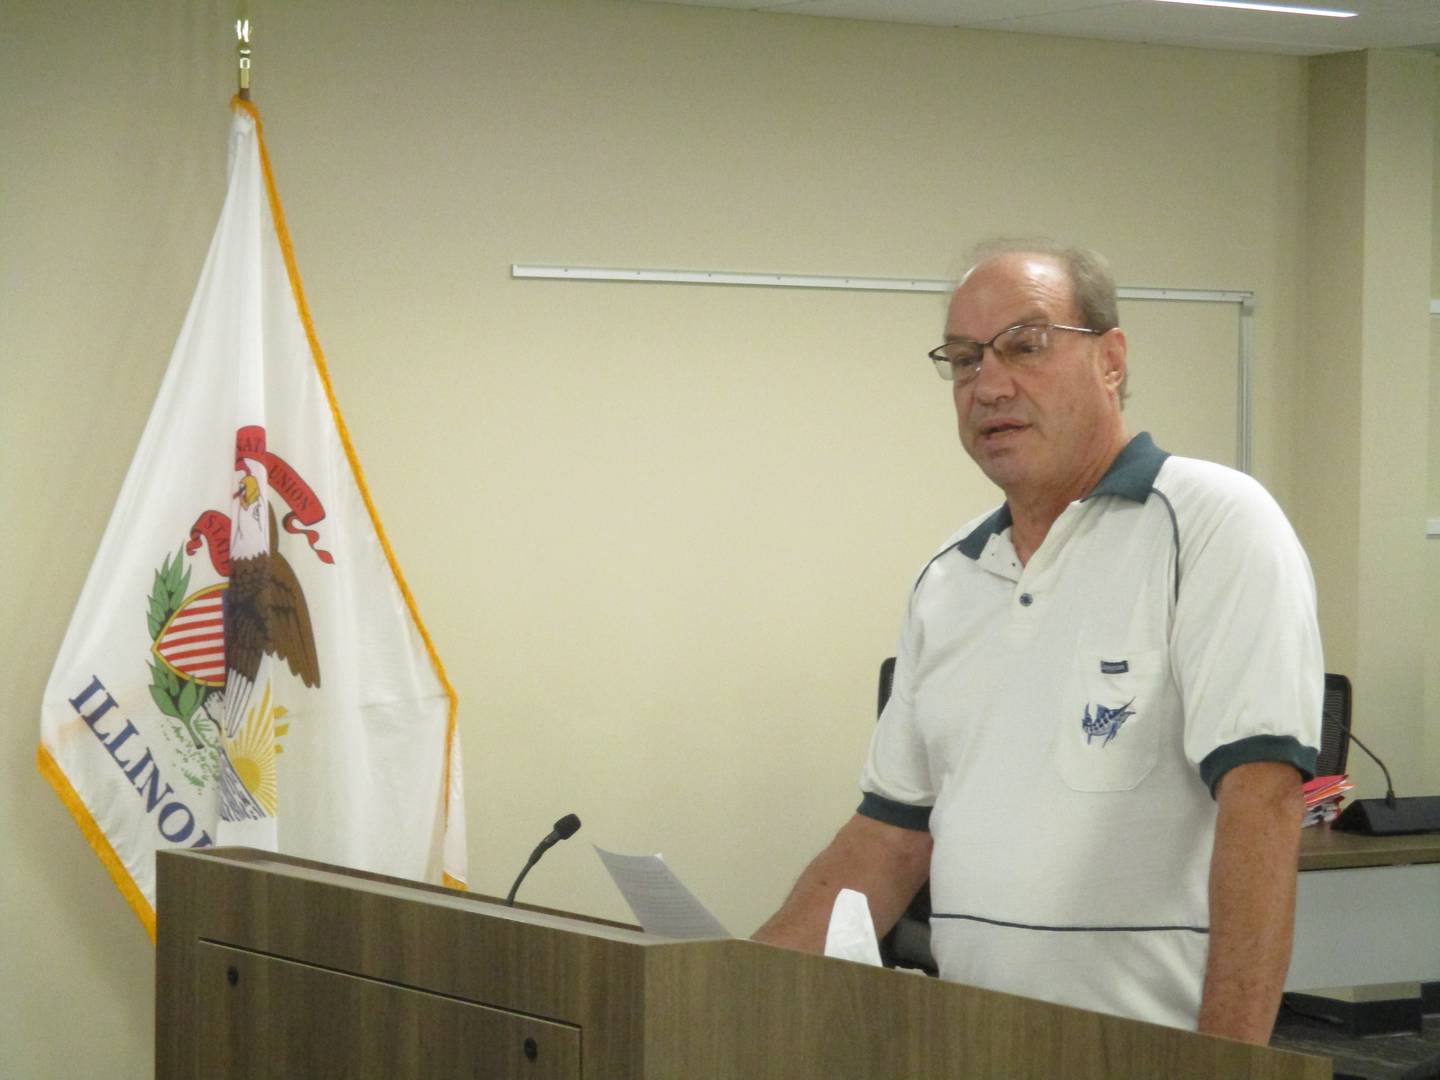 Kendall County Board candidate Todd Milliron speaks to board members on Aug. 16, 2022.